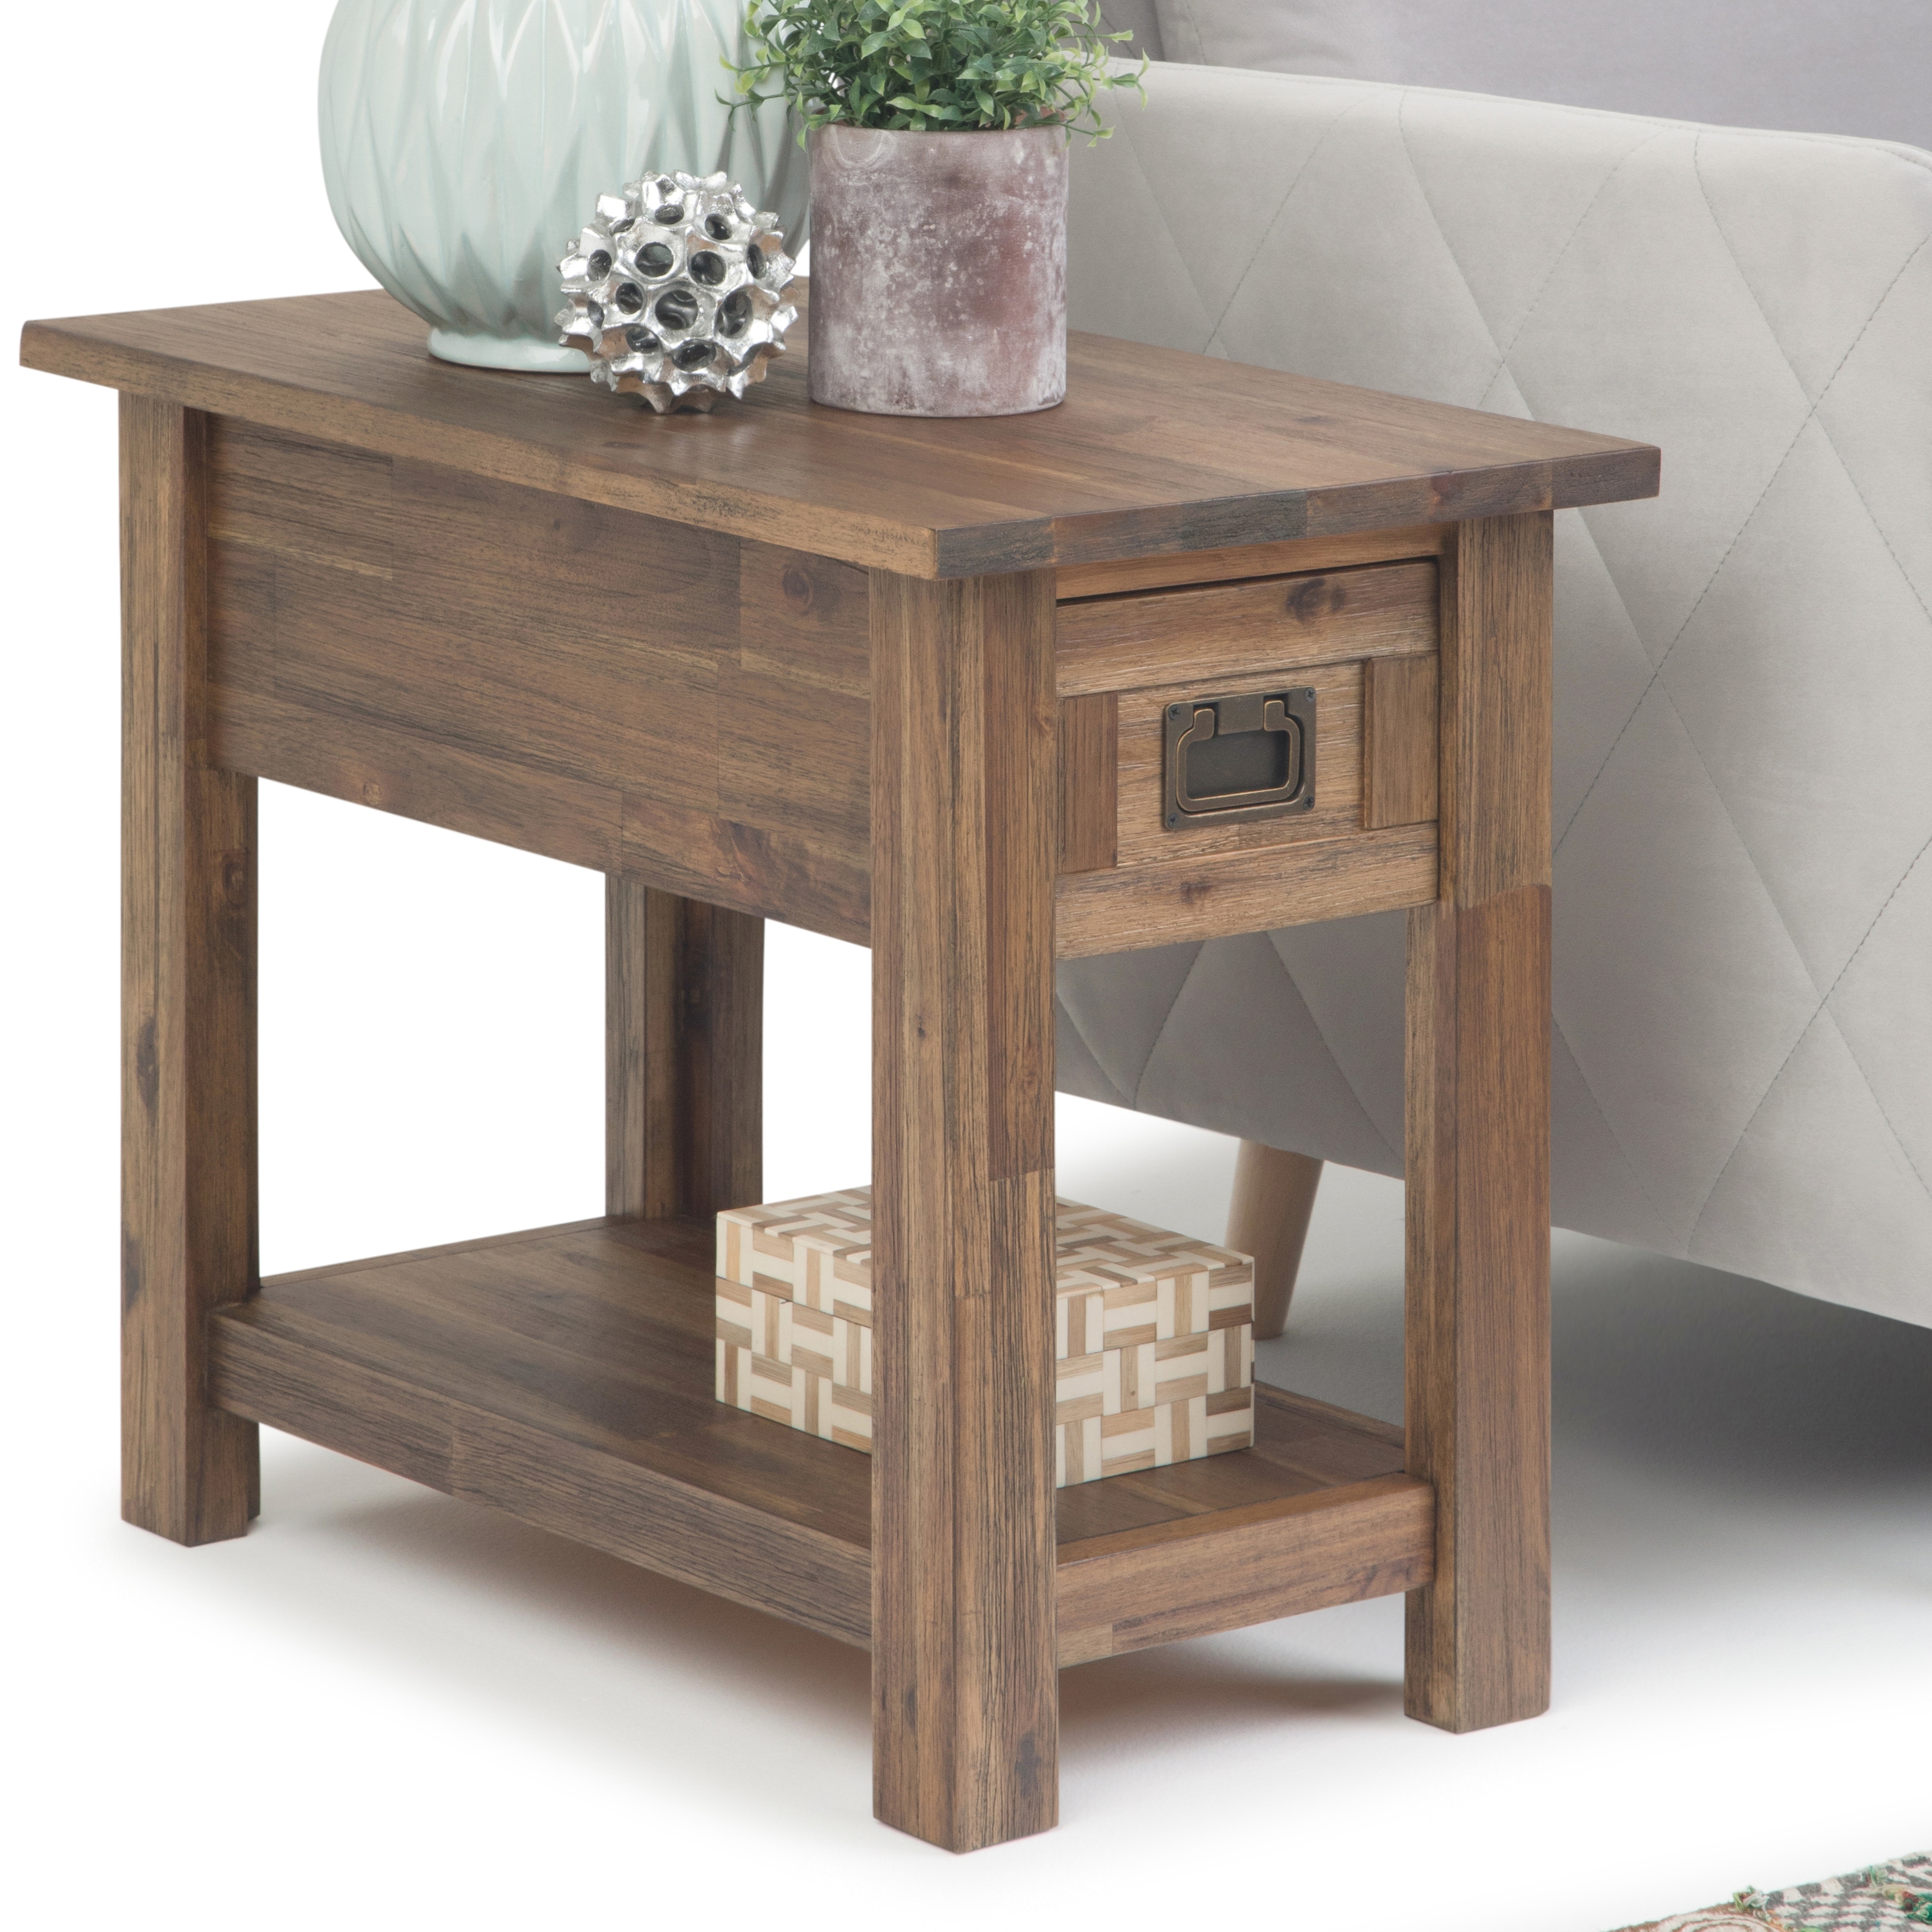 18 Alrich Round Side Table Natural - WyndenHall